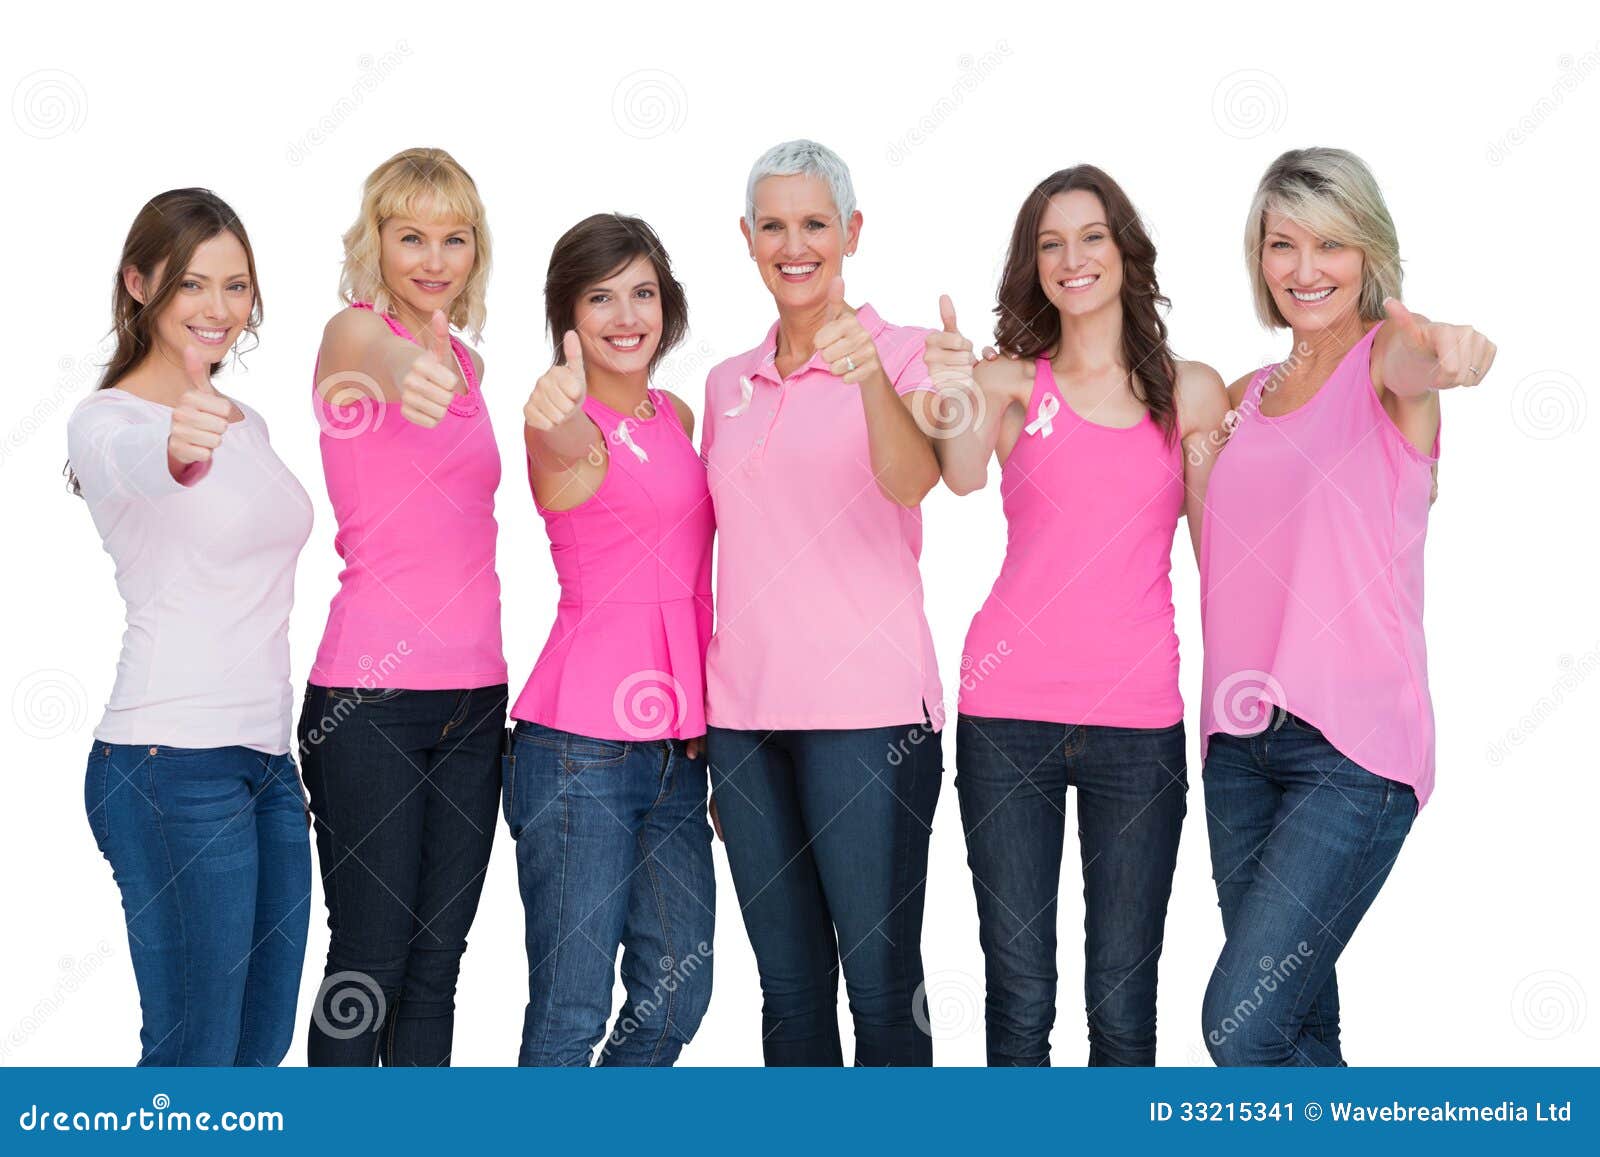 Positive Women Wearing Pink For Breast Cancer Posing Stock Image